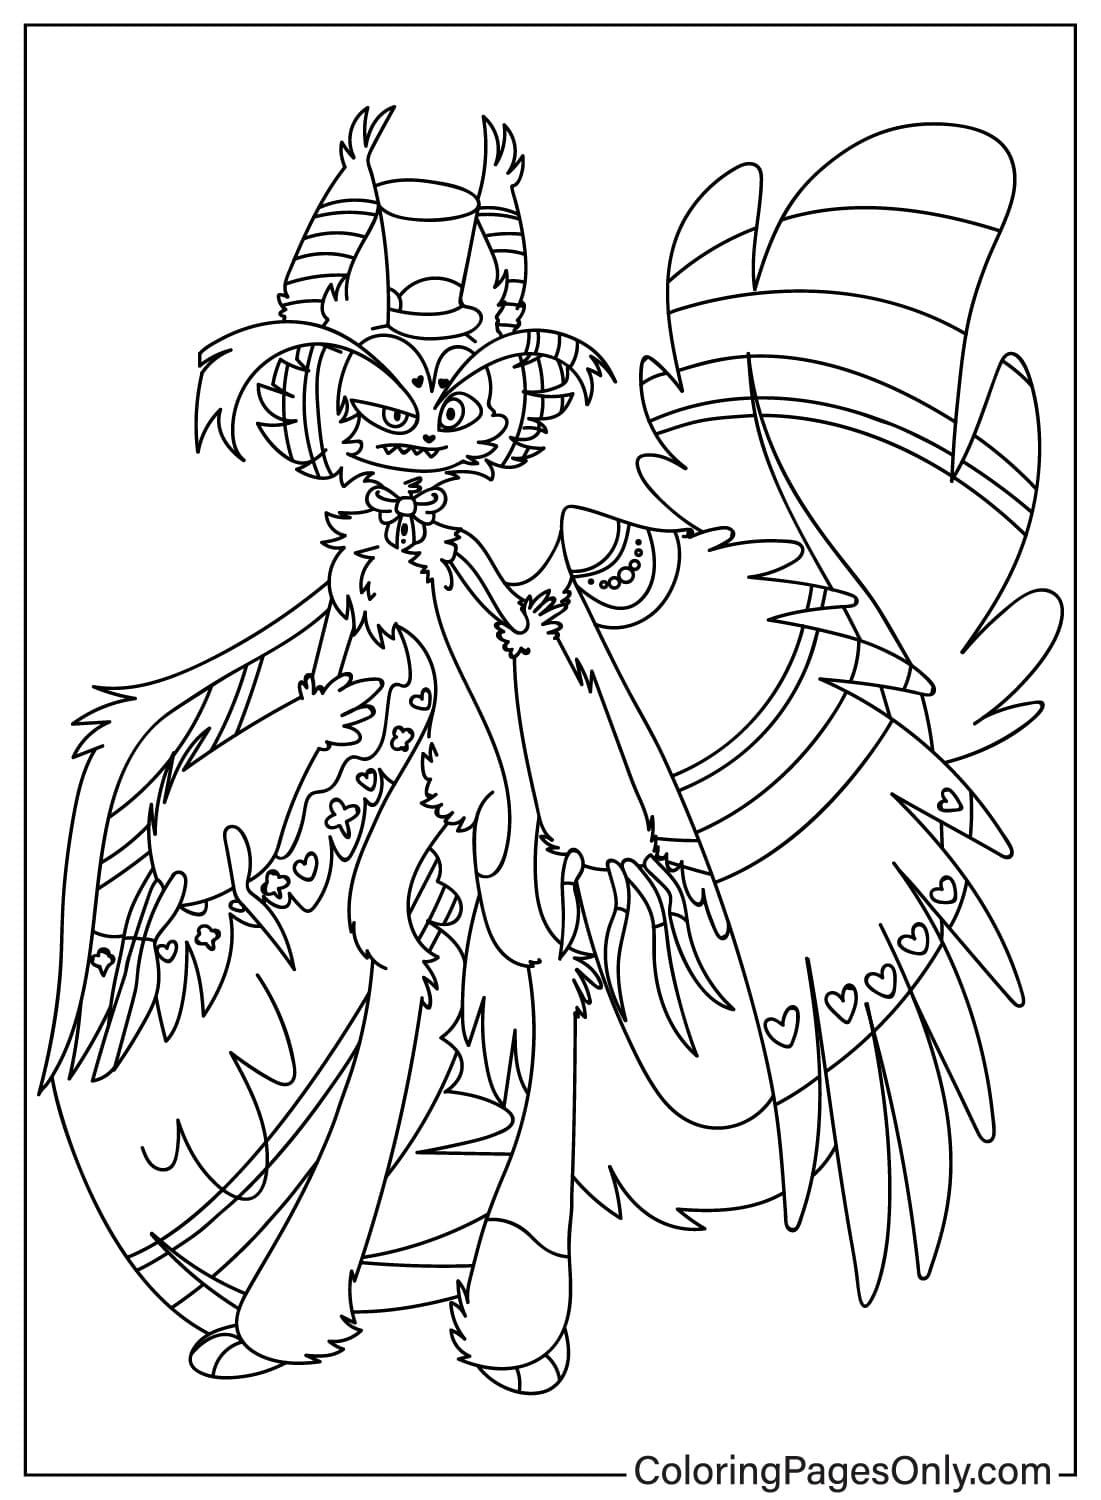 Free Husk Coloring Page from Husk